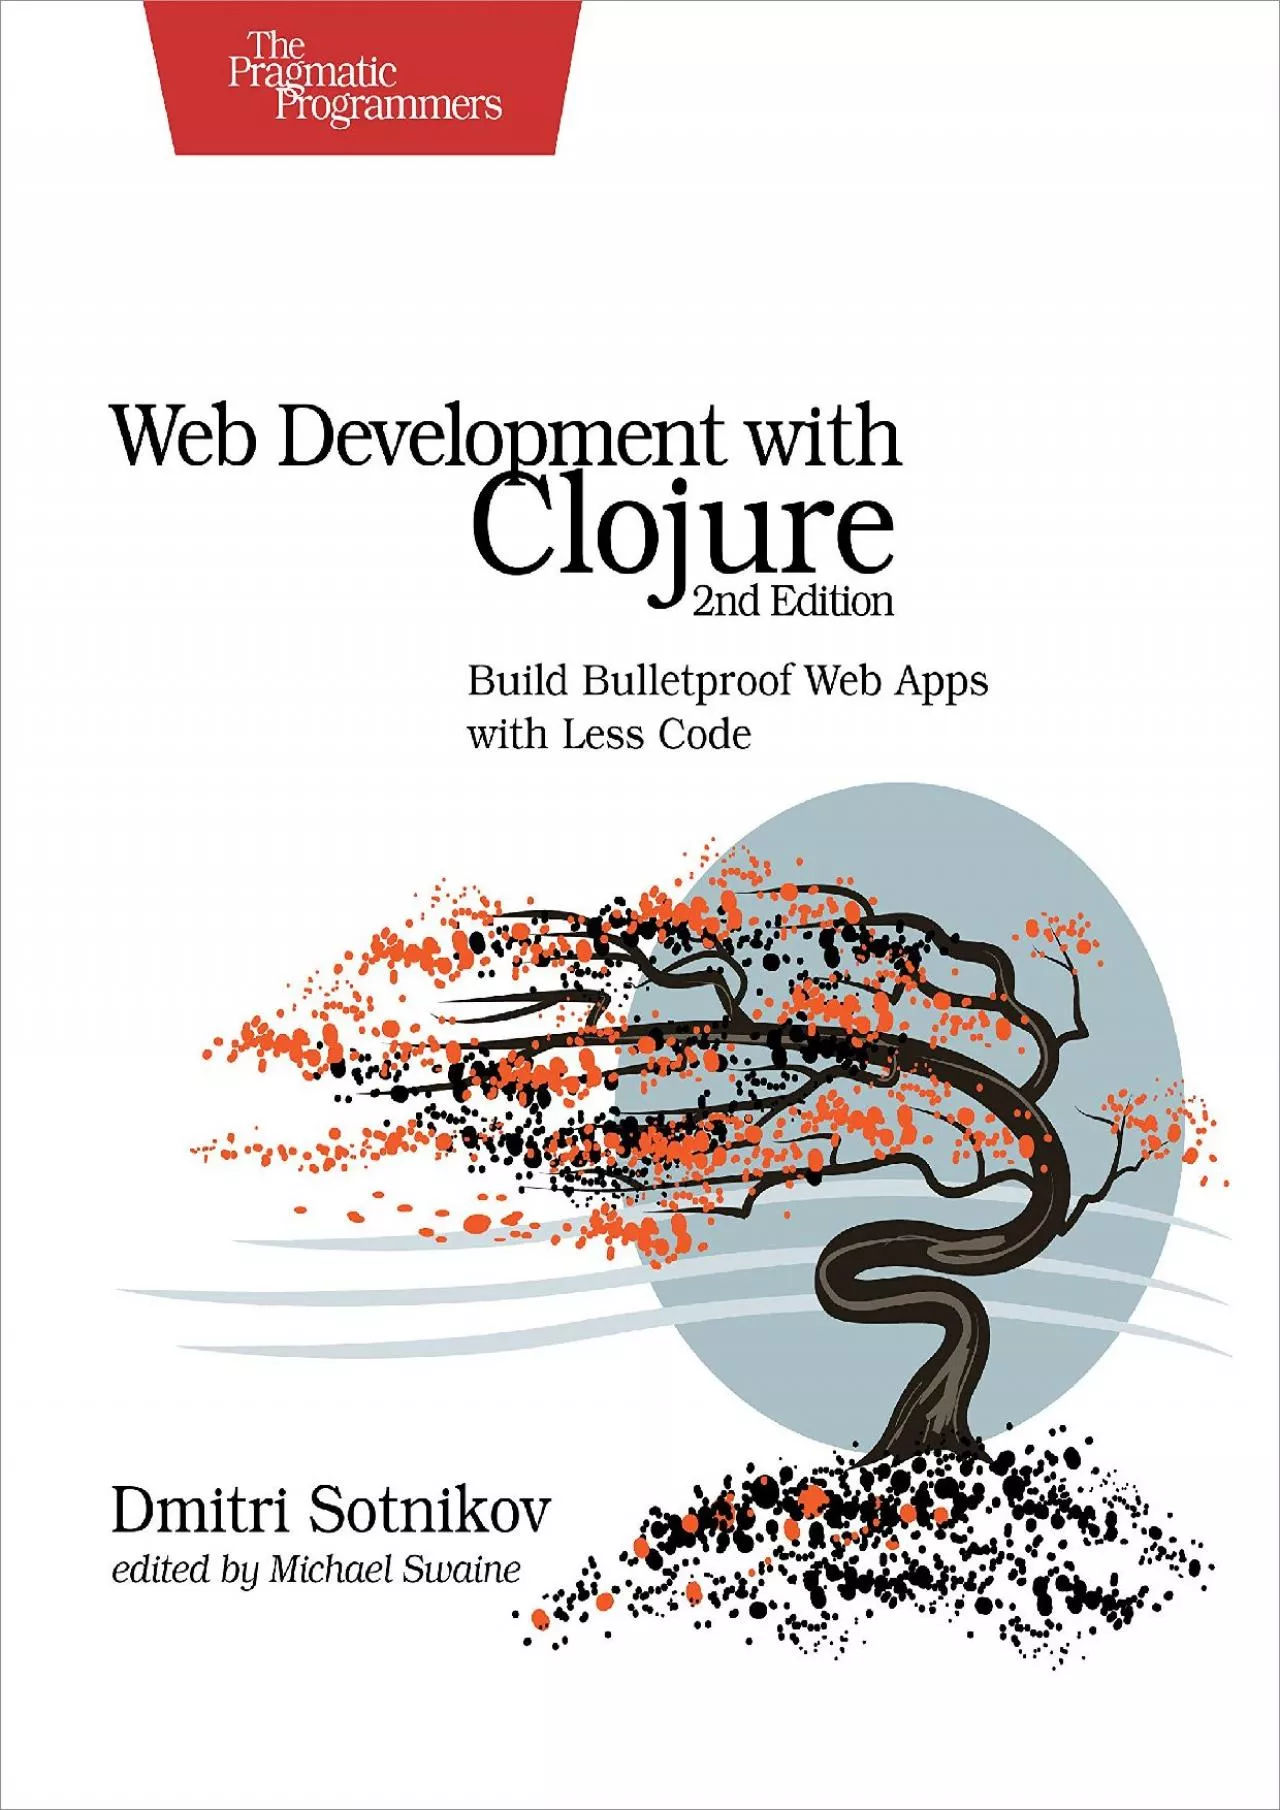 [eBOOK]-Web Development with Clojure: Build Bulletproof Web Apps with Less Code